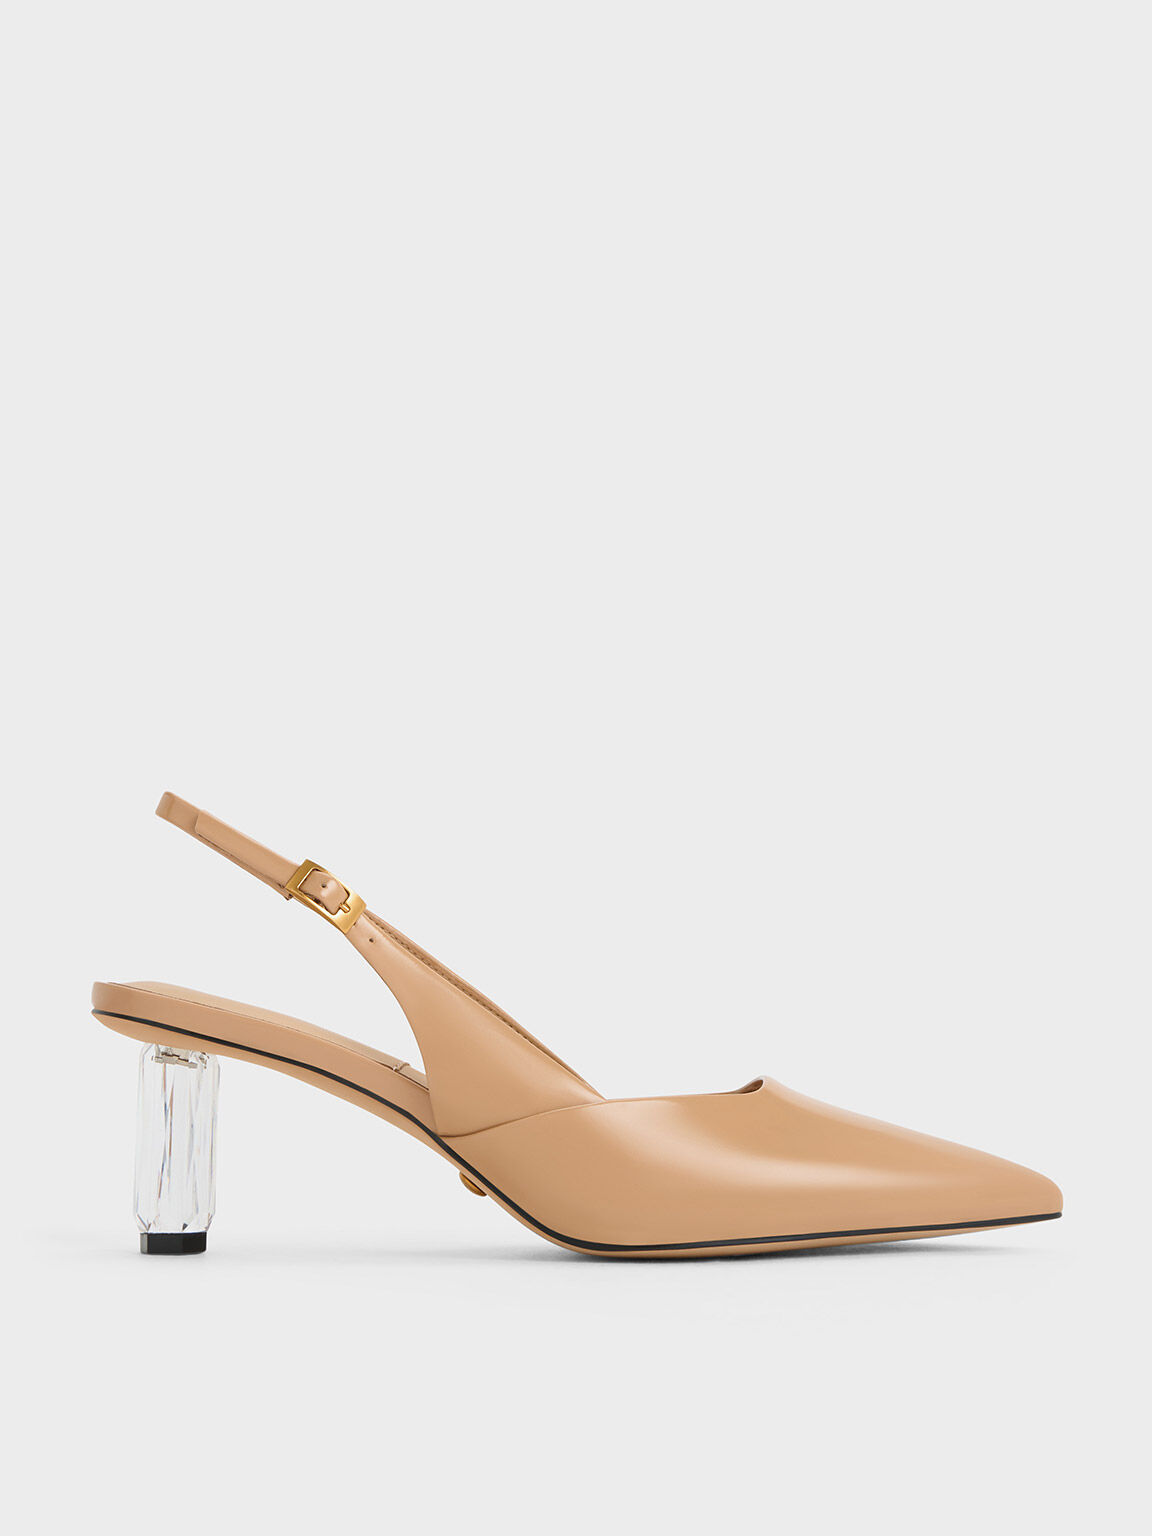 Dune London has released a range of nude colour high heel shoes which are  similar to Christian Louboutins | HELLO!